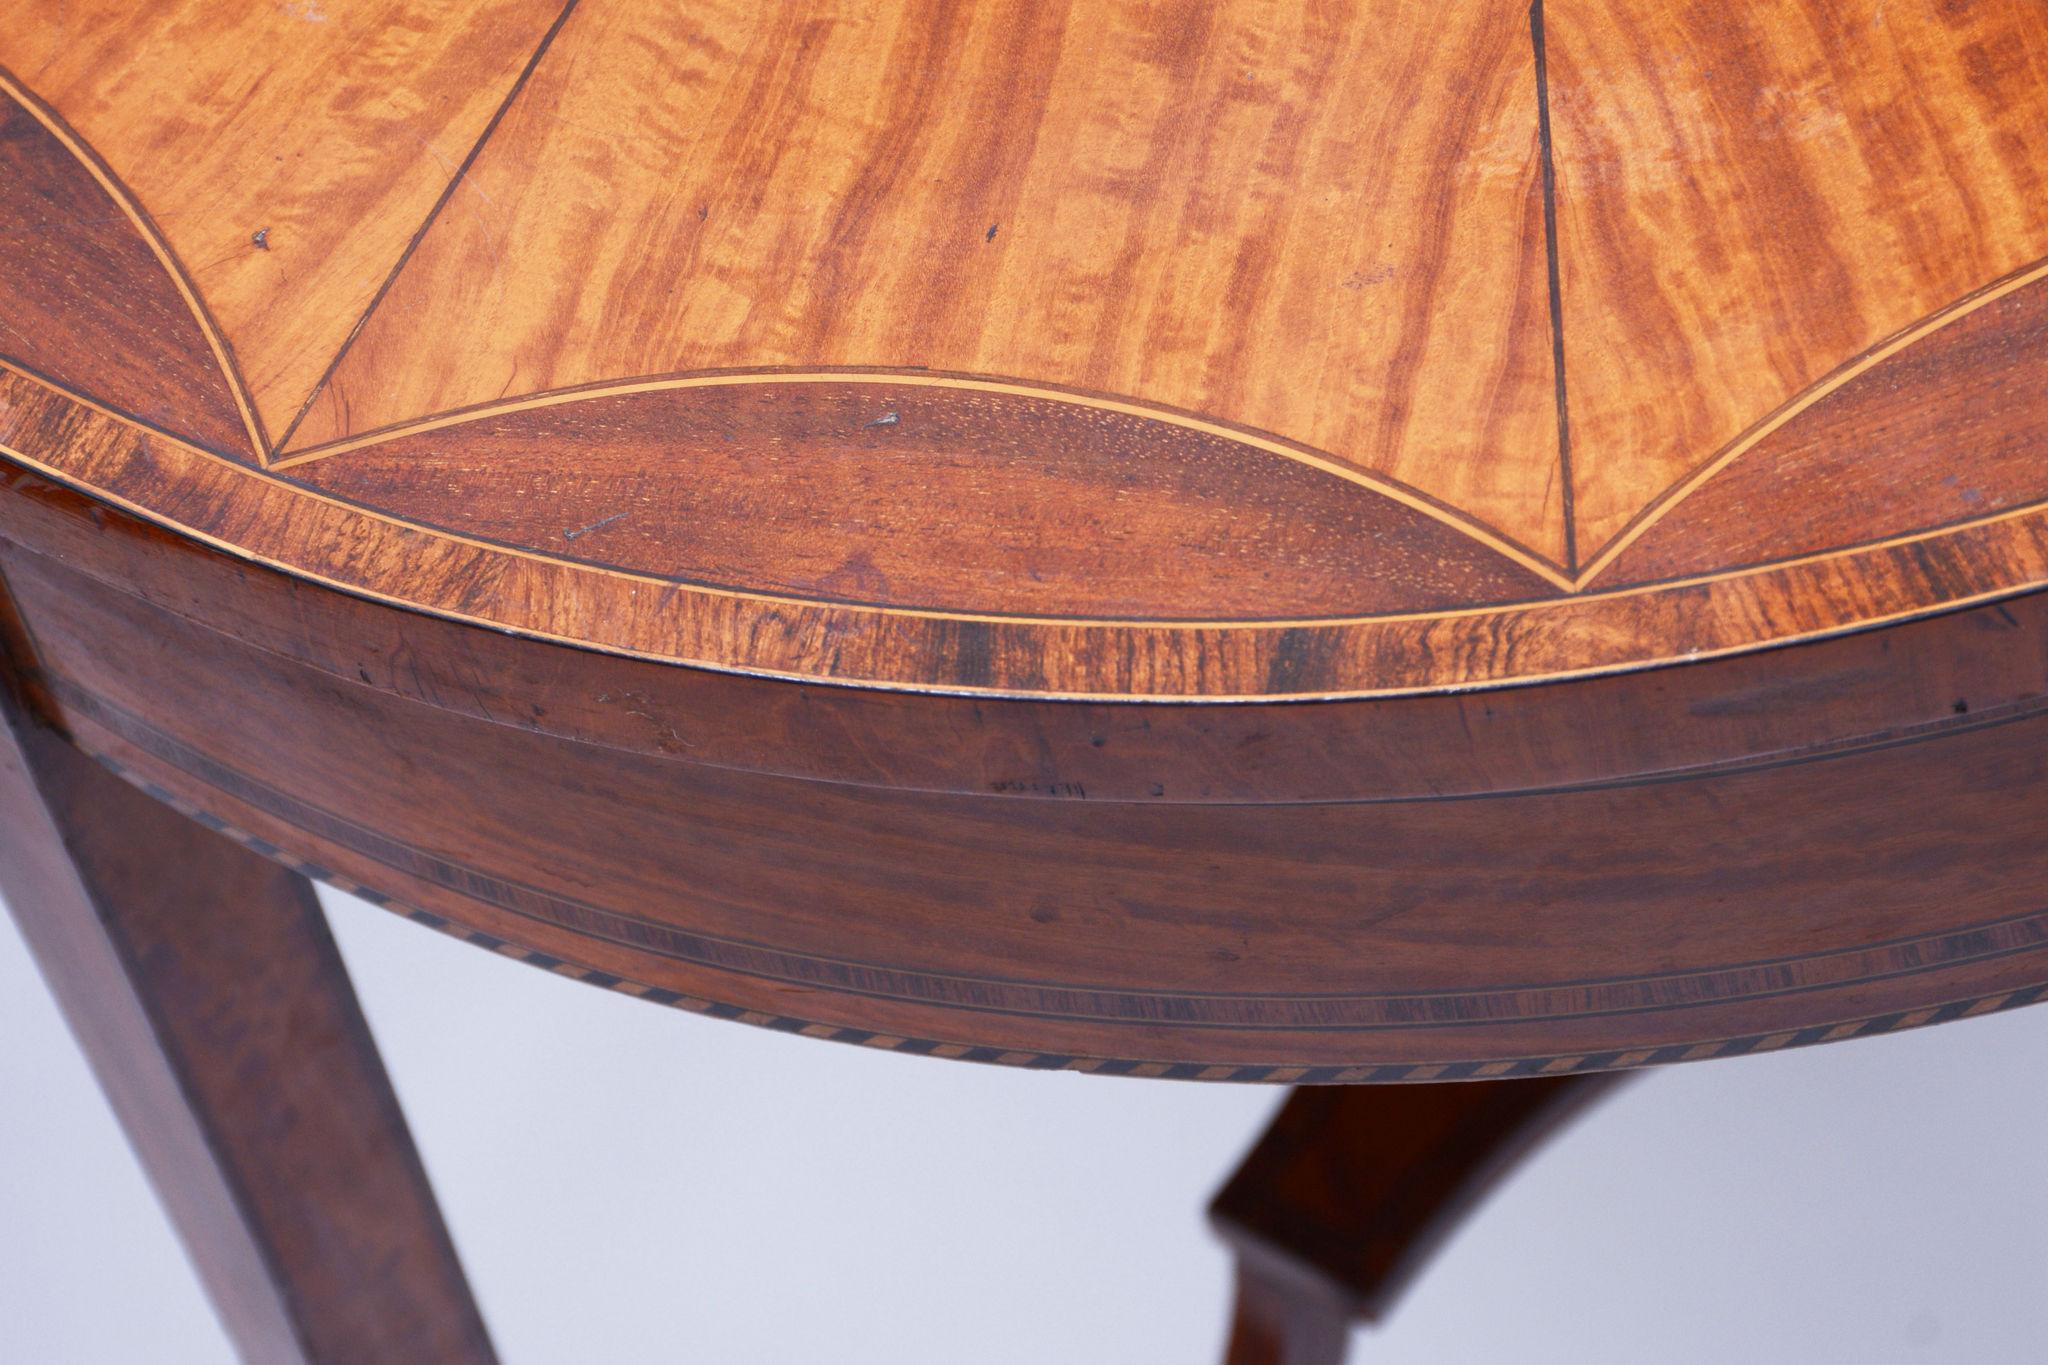 Restored Biedermeier Cherry-Tree Round Table. Uniquely extensive and detailed marquetry. Original polish. Brass wheels.

Source: France 
Period: 1850-1859 
Material: Cherry tree, Maple, Satinwood

Our professional refurbishing team in Czechia